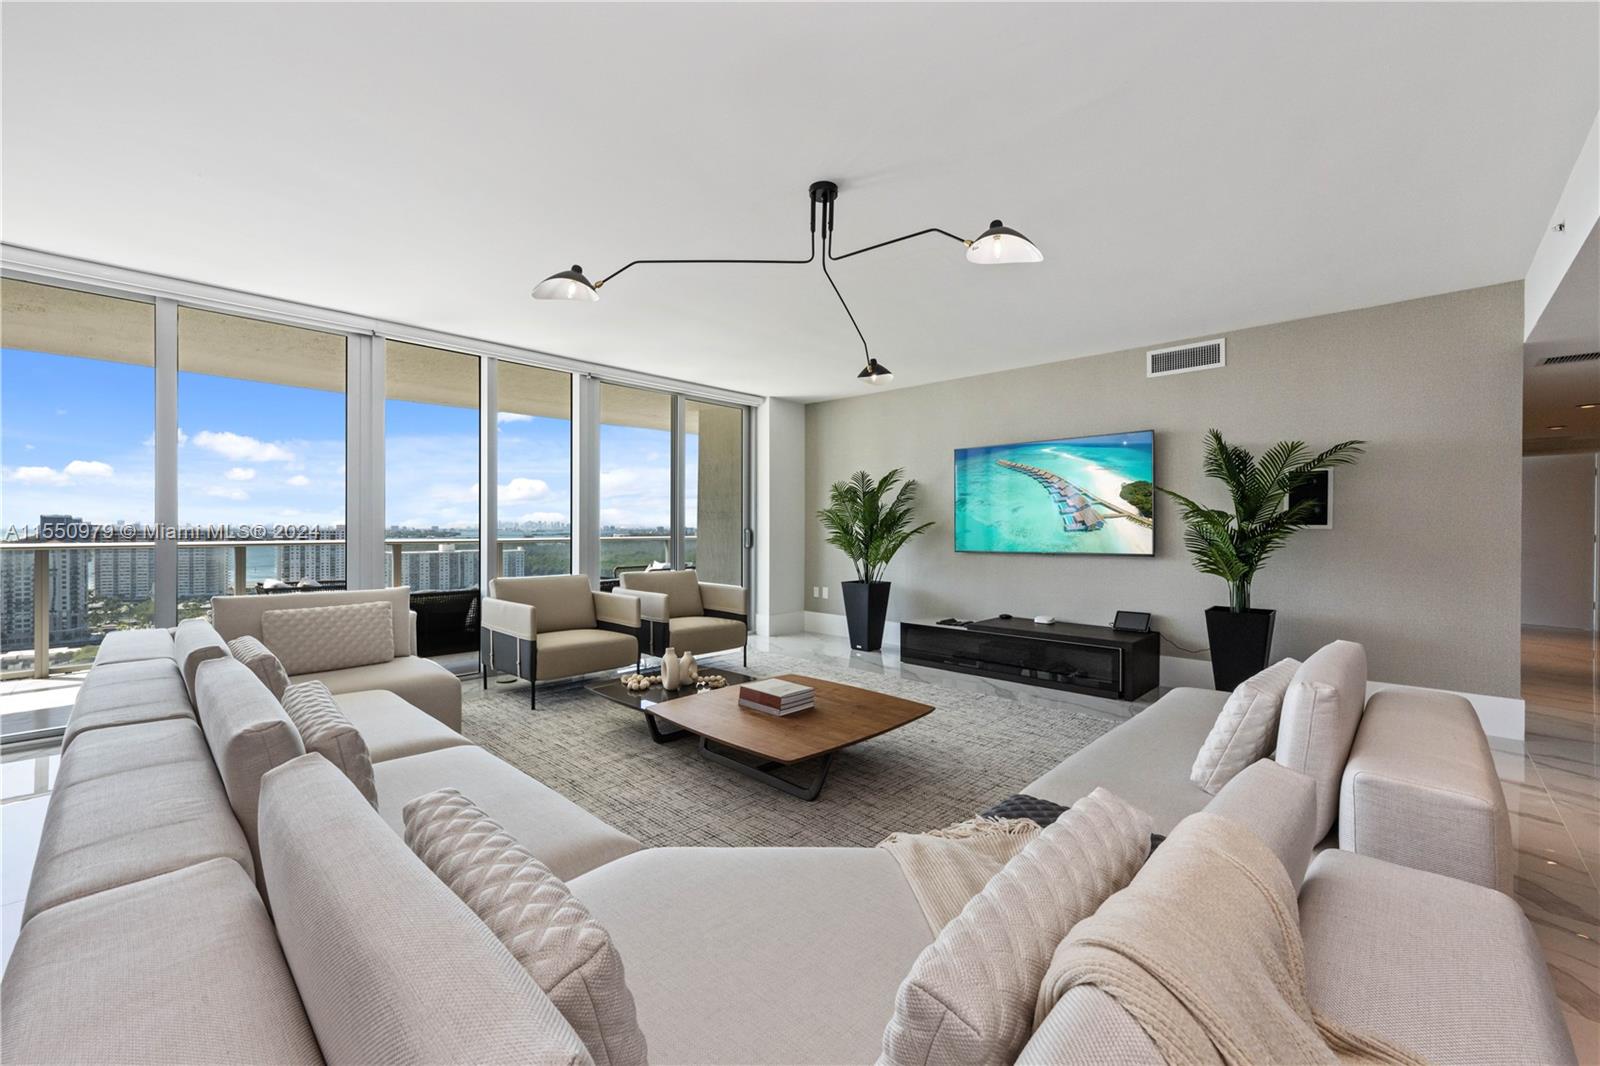 Property for Sale at 330 Sunny Isles Blvd Blvd 5-2304/230, Sunny Isles Beach, Miami-Dade County, Florida - Bedrooms: 4 
Bathrooms: 5  - $3,485,000